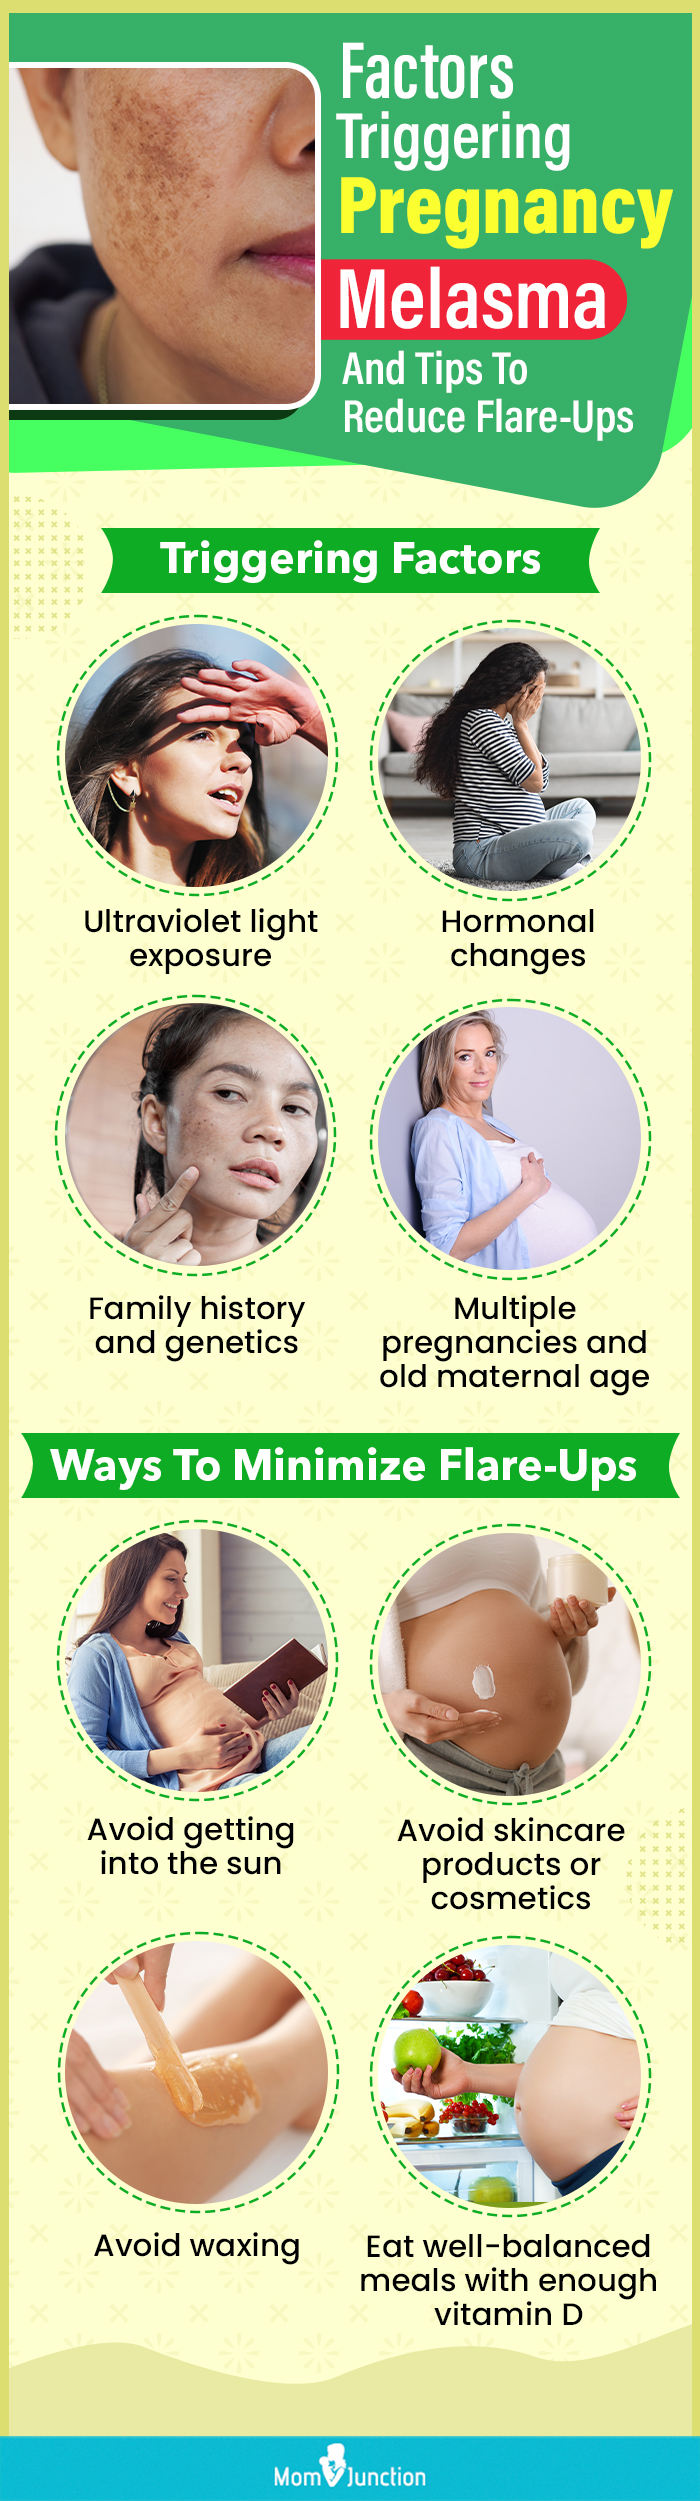 factors triggering pregnancy melasma and tips to reduce flare ups (infographic)